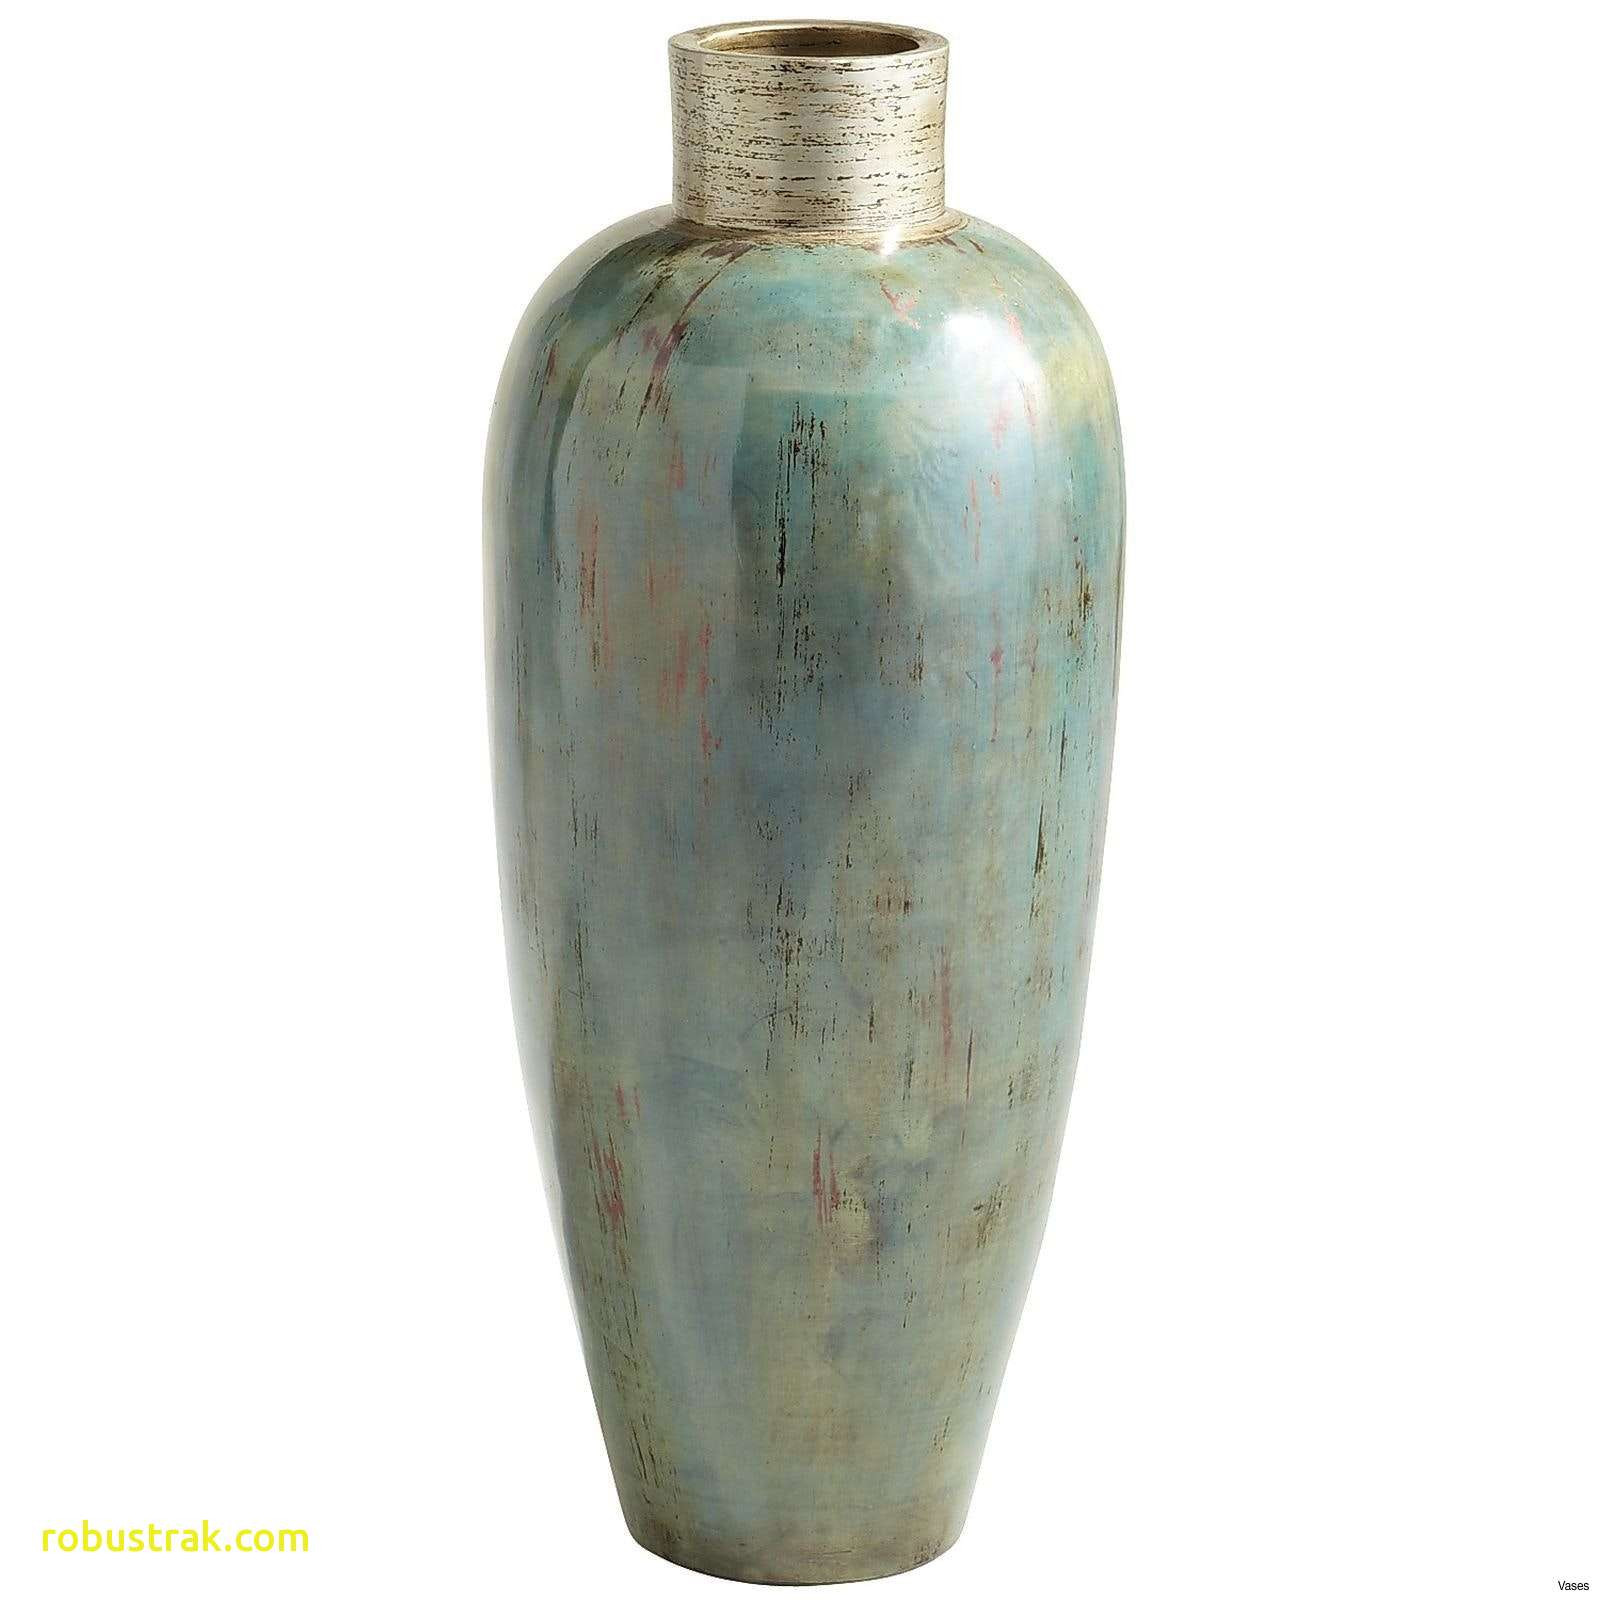 home decor large floor vases of awesome decorative vases for living room home design ideas with regard to marvelous tall ceramic vases mid century shaped blue glazed floor vase outdoorh living room decorative contemporary